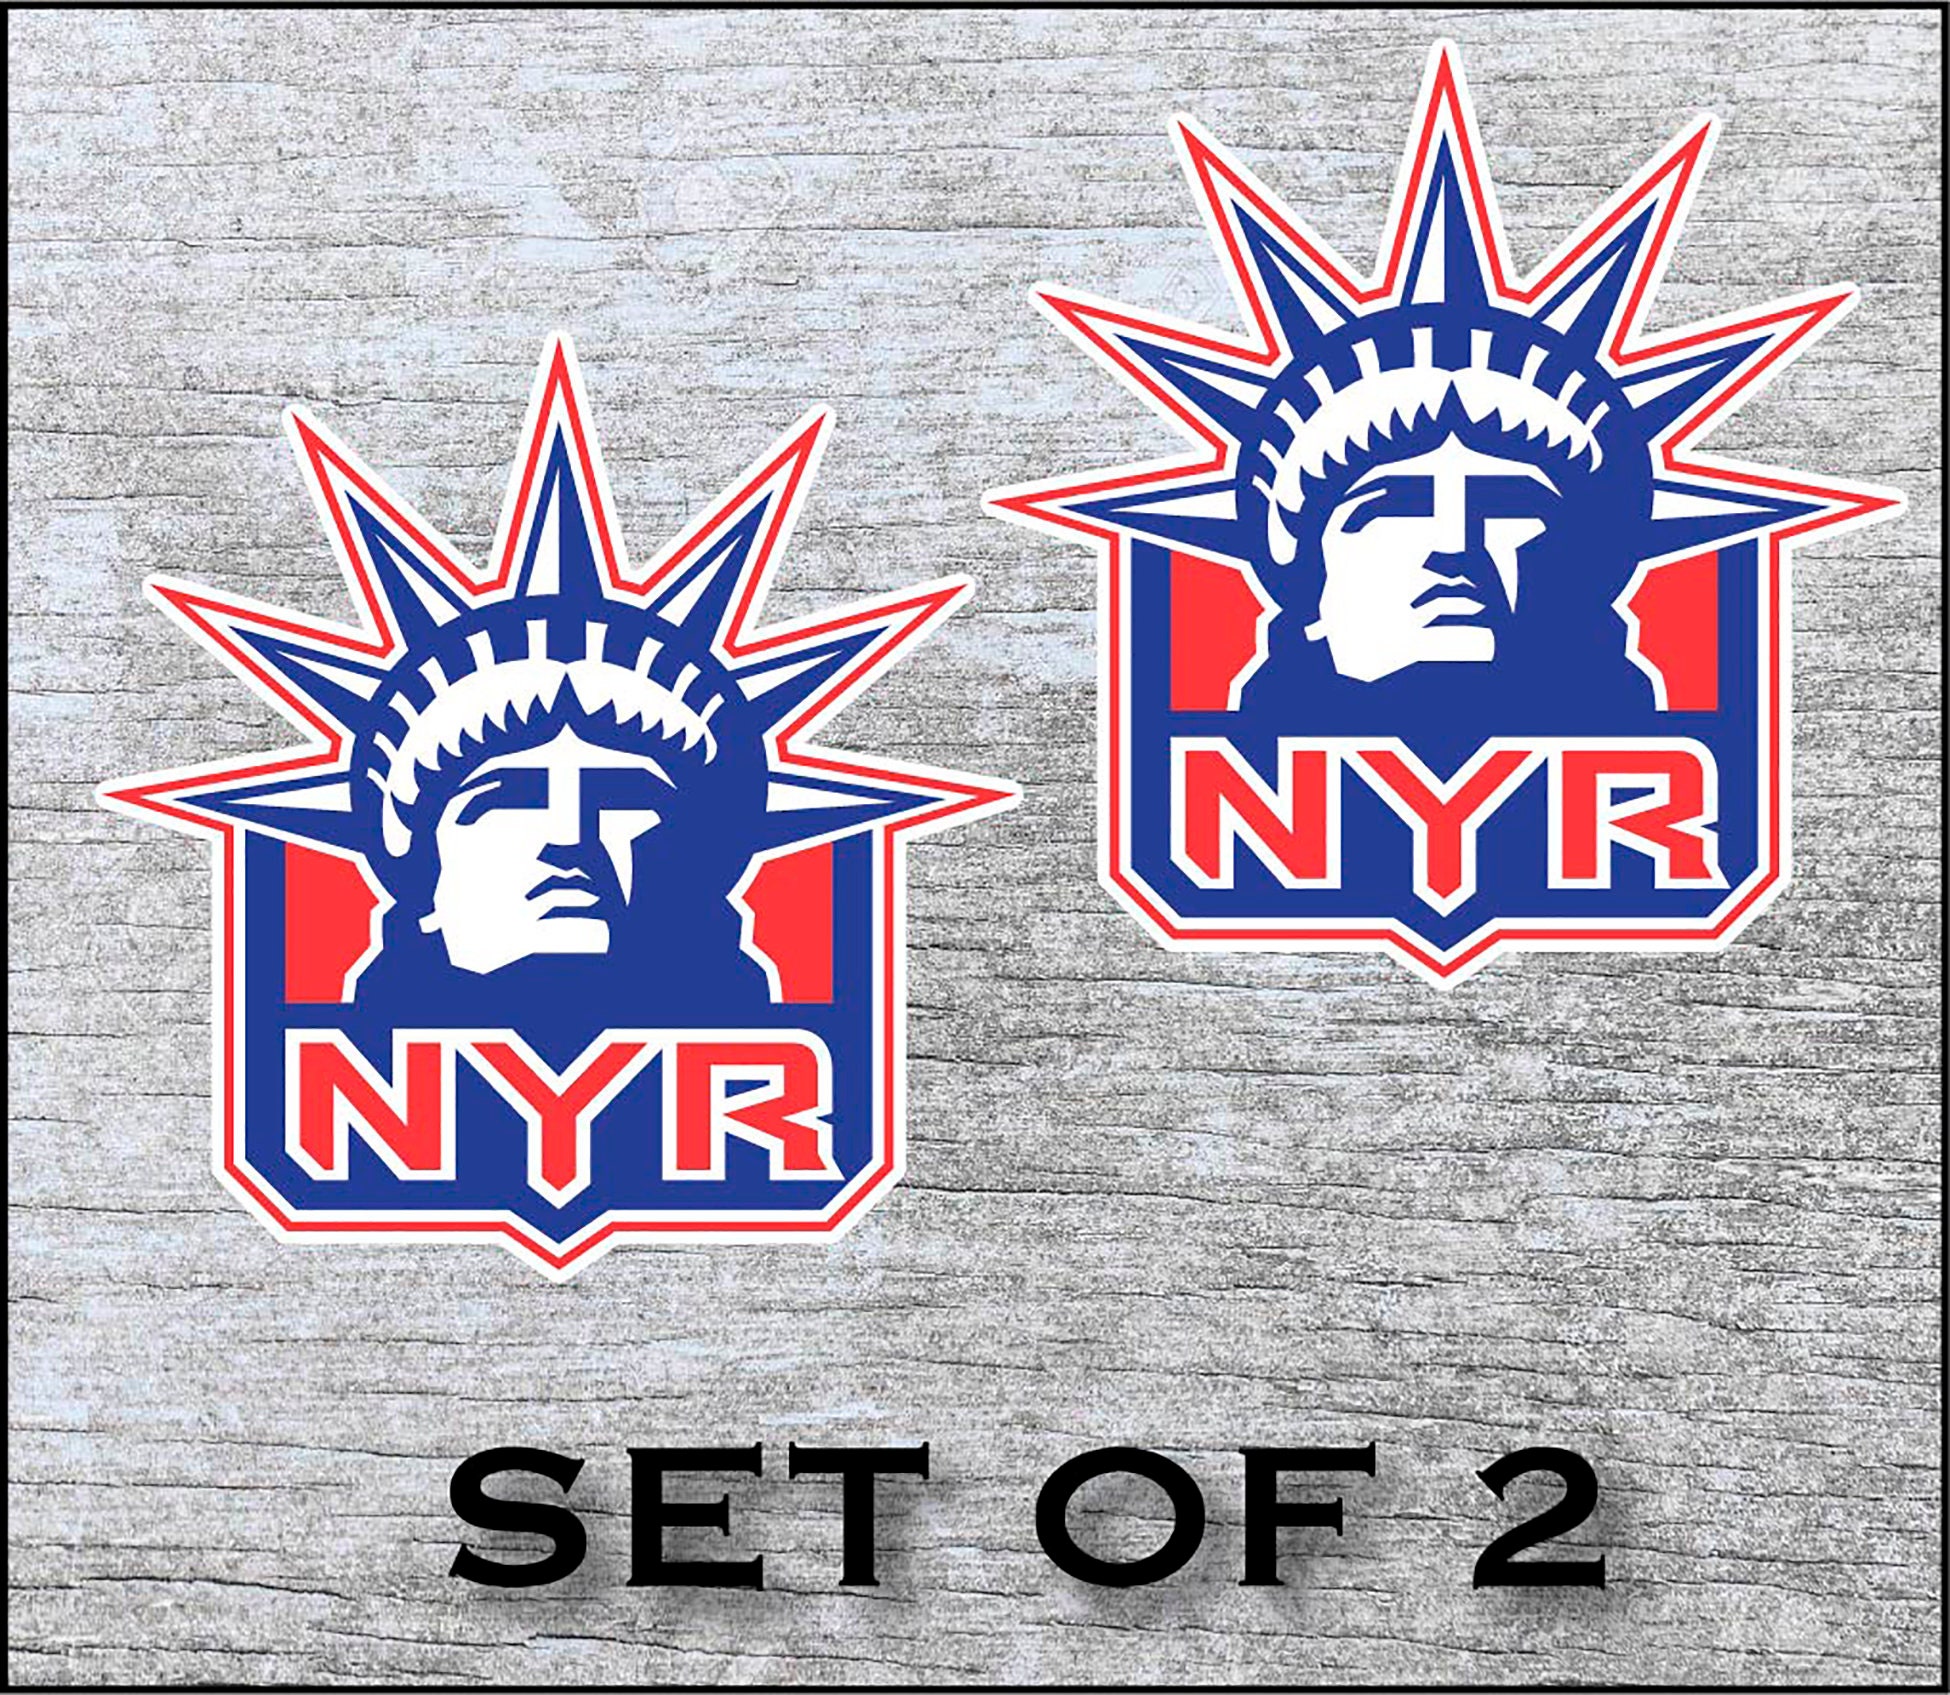 NY Rangers updated Liberty logo. Thoughts? : r/rangers